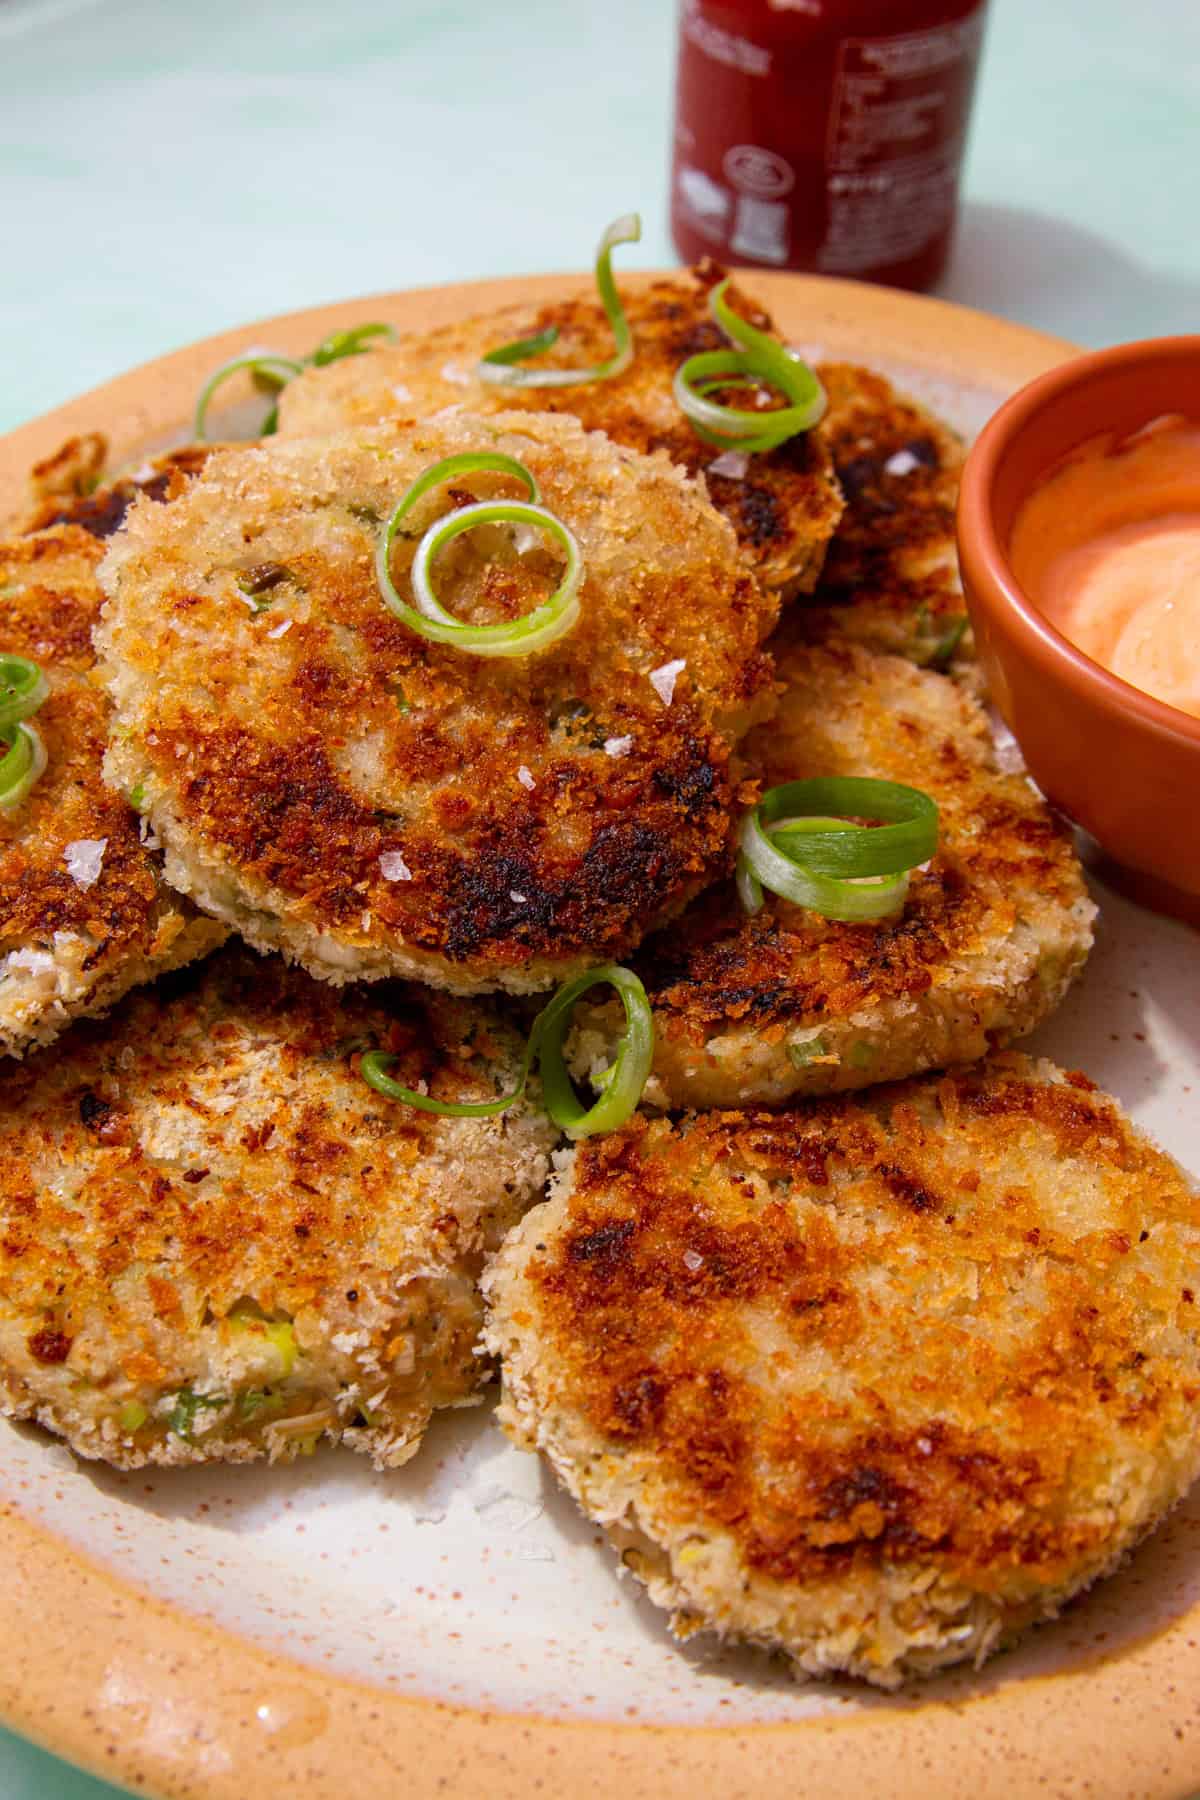 Golden browned fishcakes, piled on a plate with spirals of spring onion and a small bowl of dip and a container of sauce in partial view.